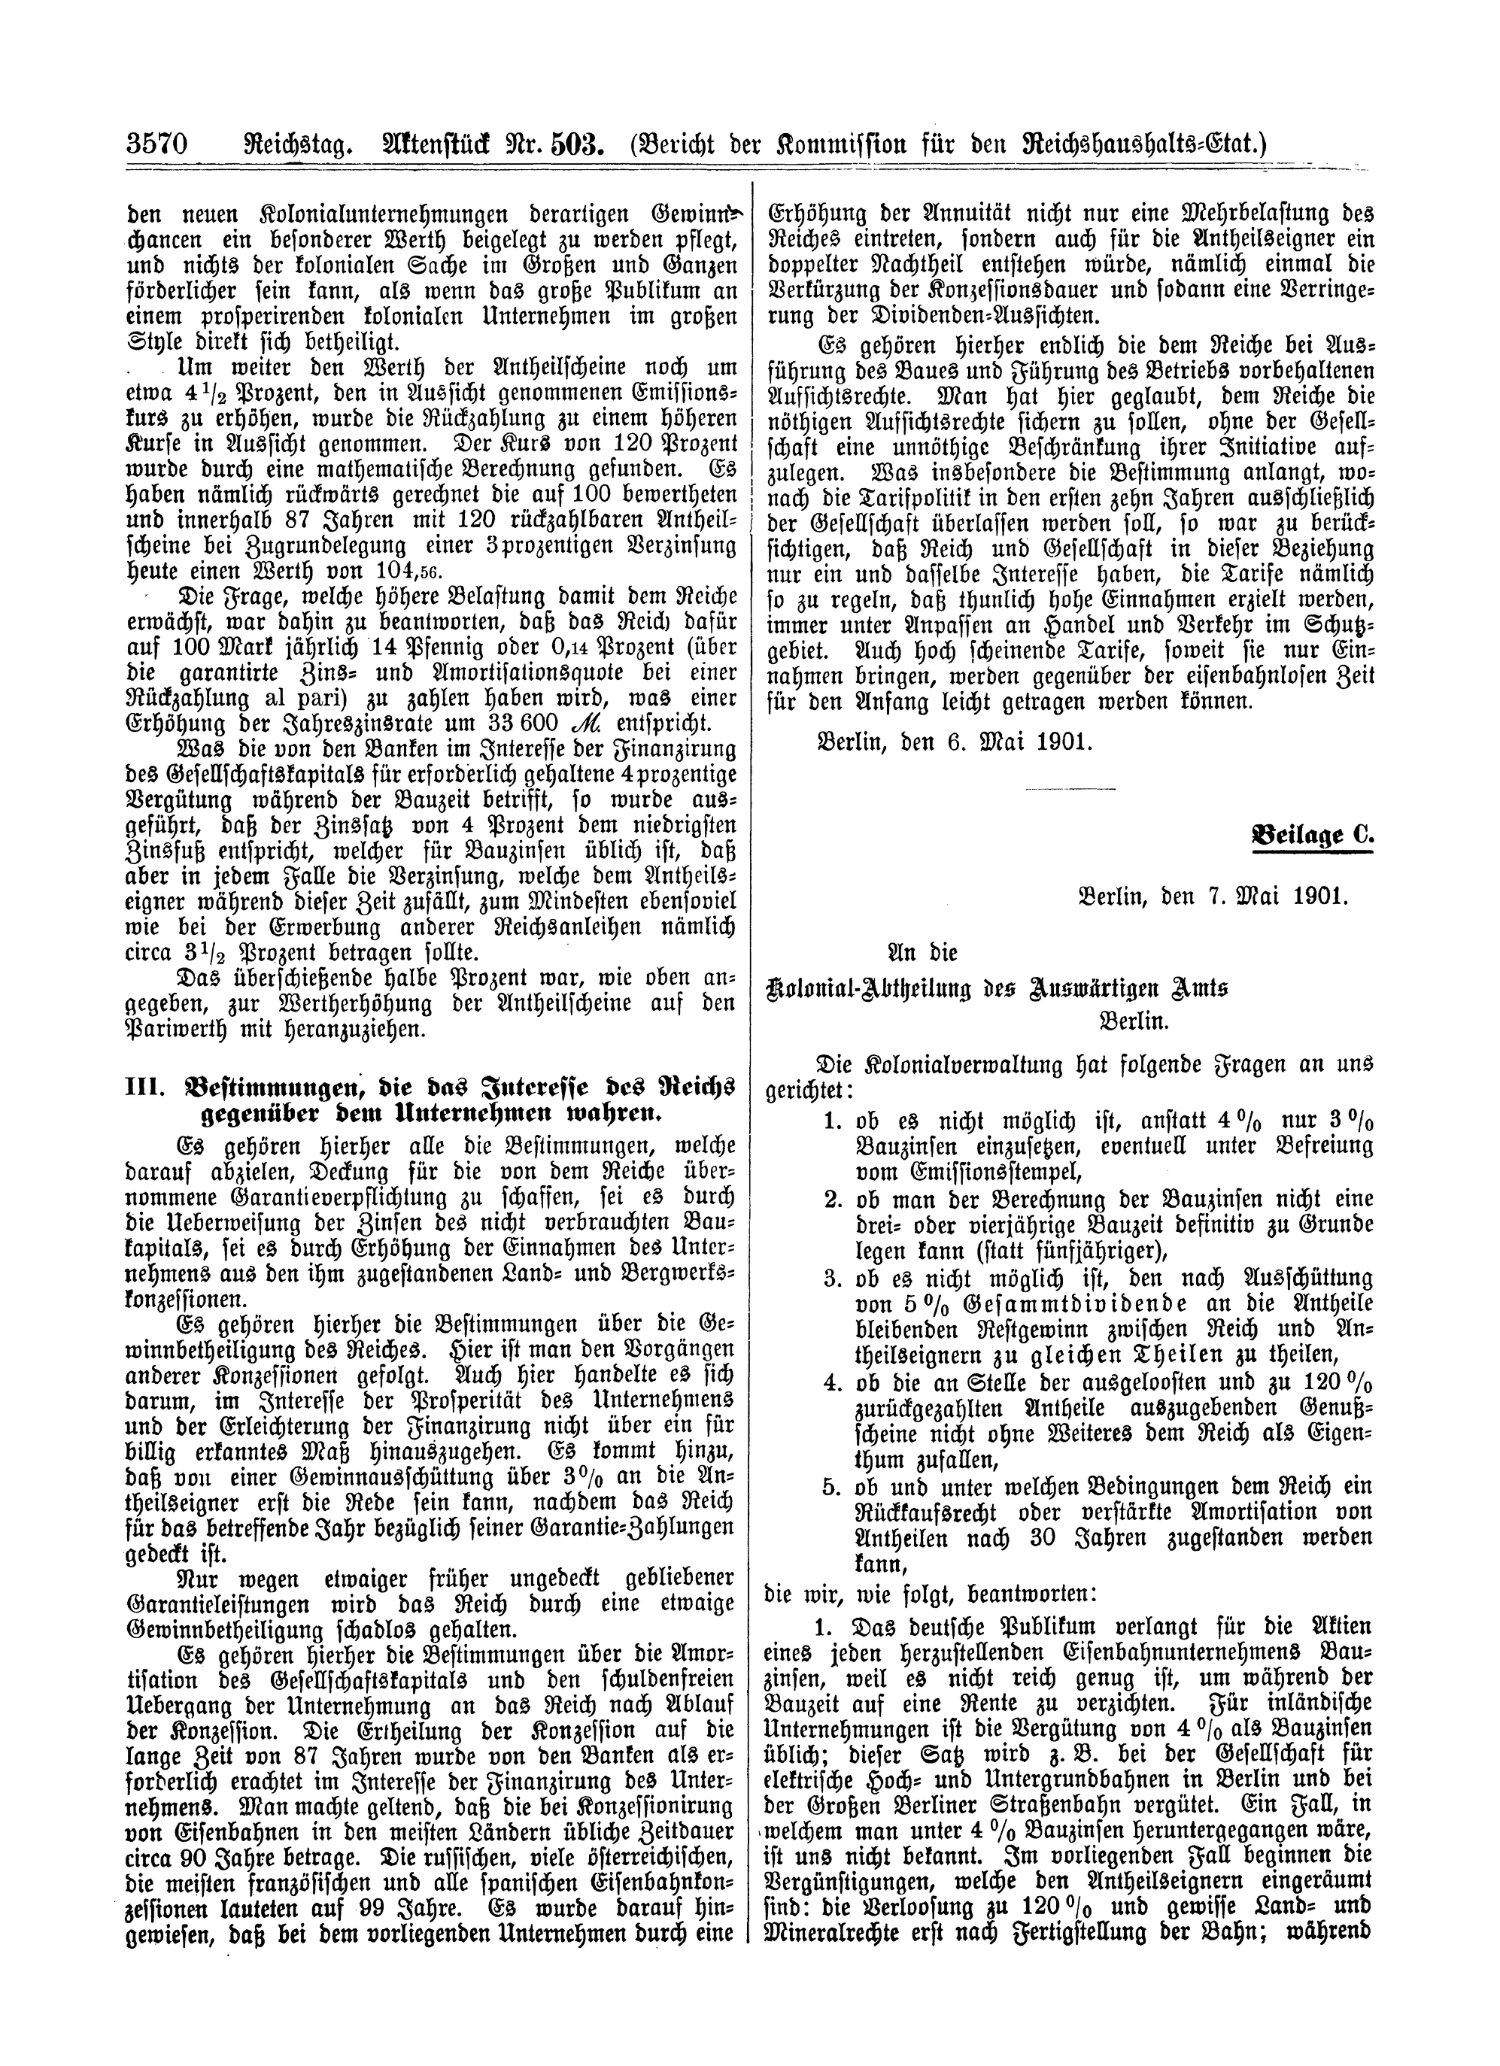 Scan of page 3570